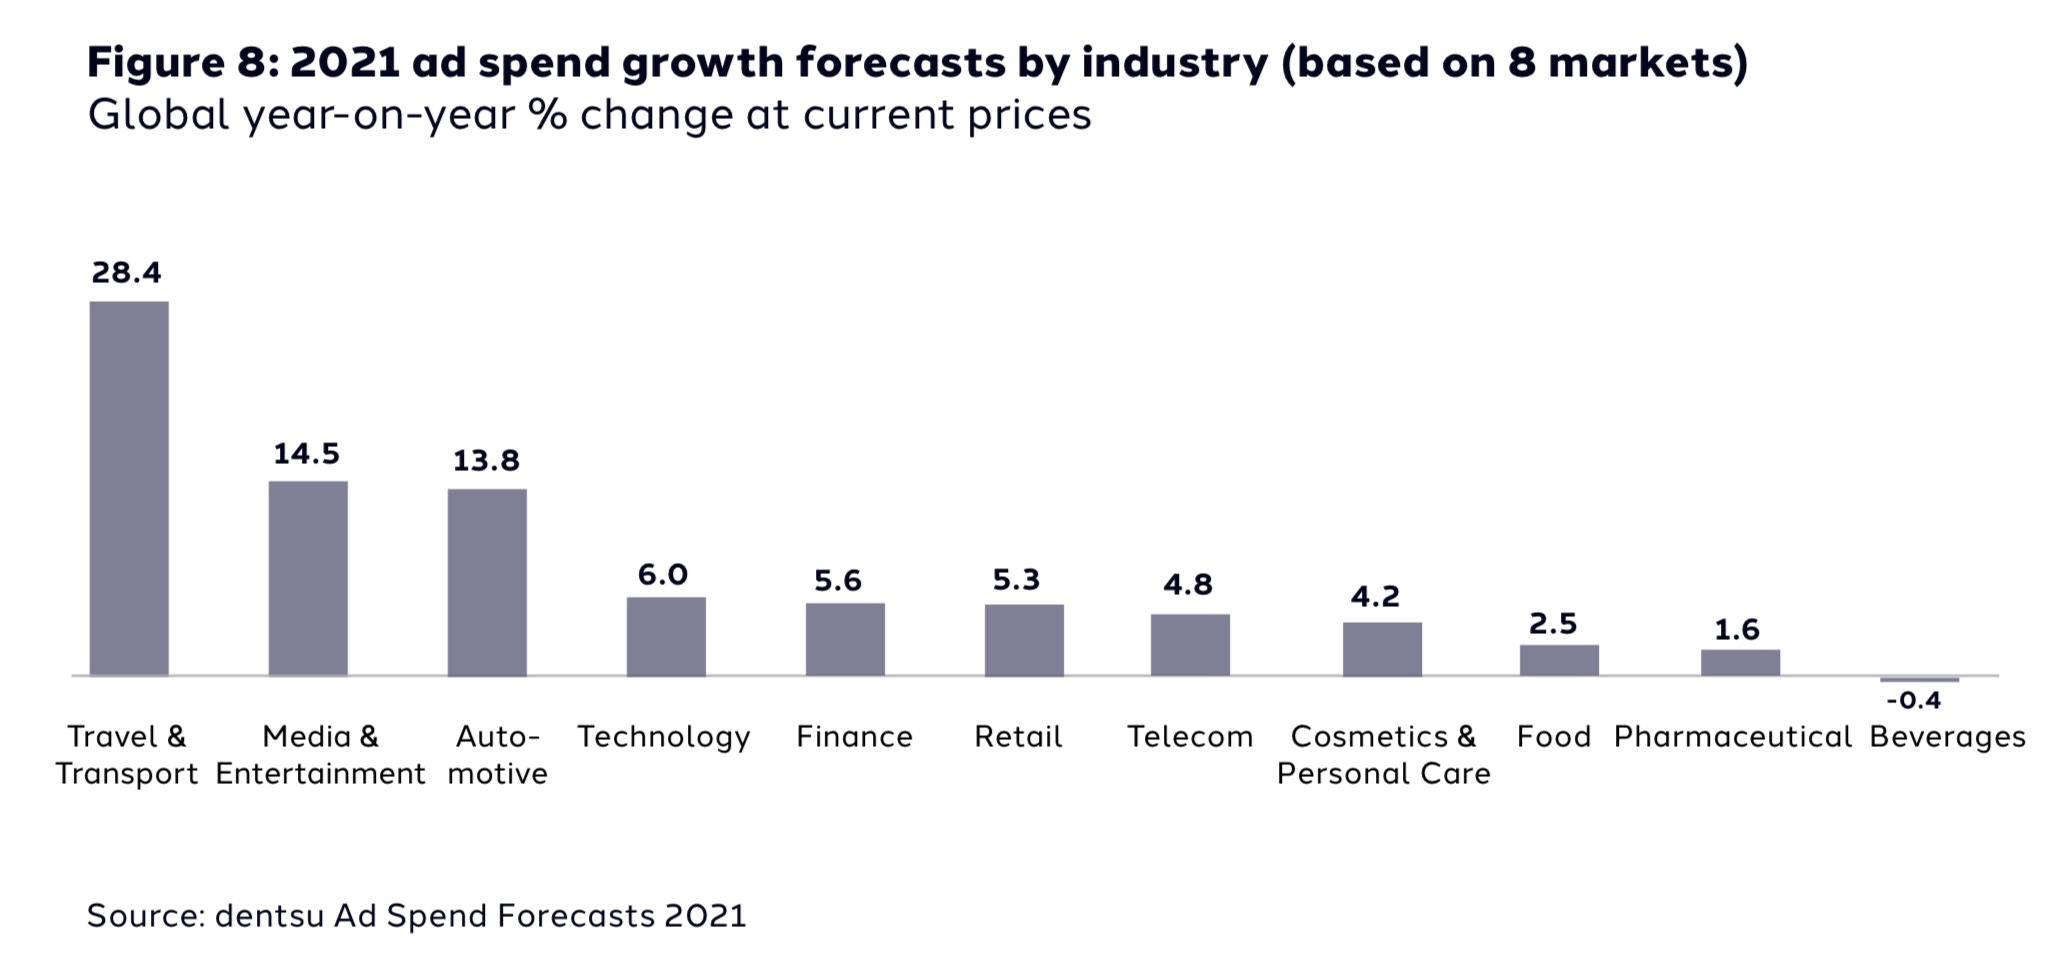 2021 ad spend growth forecasts by industry